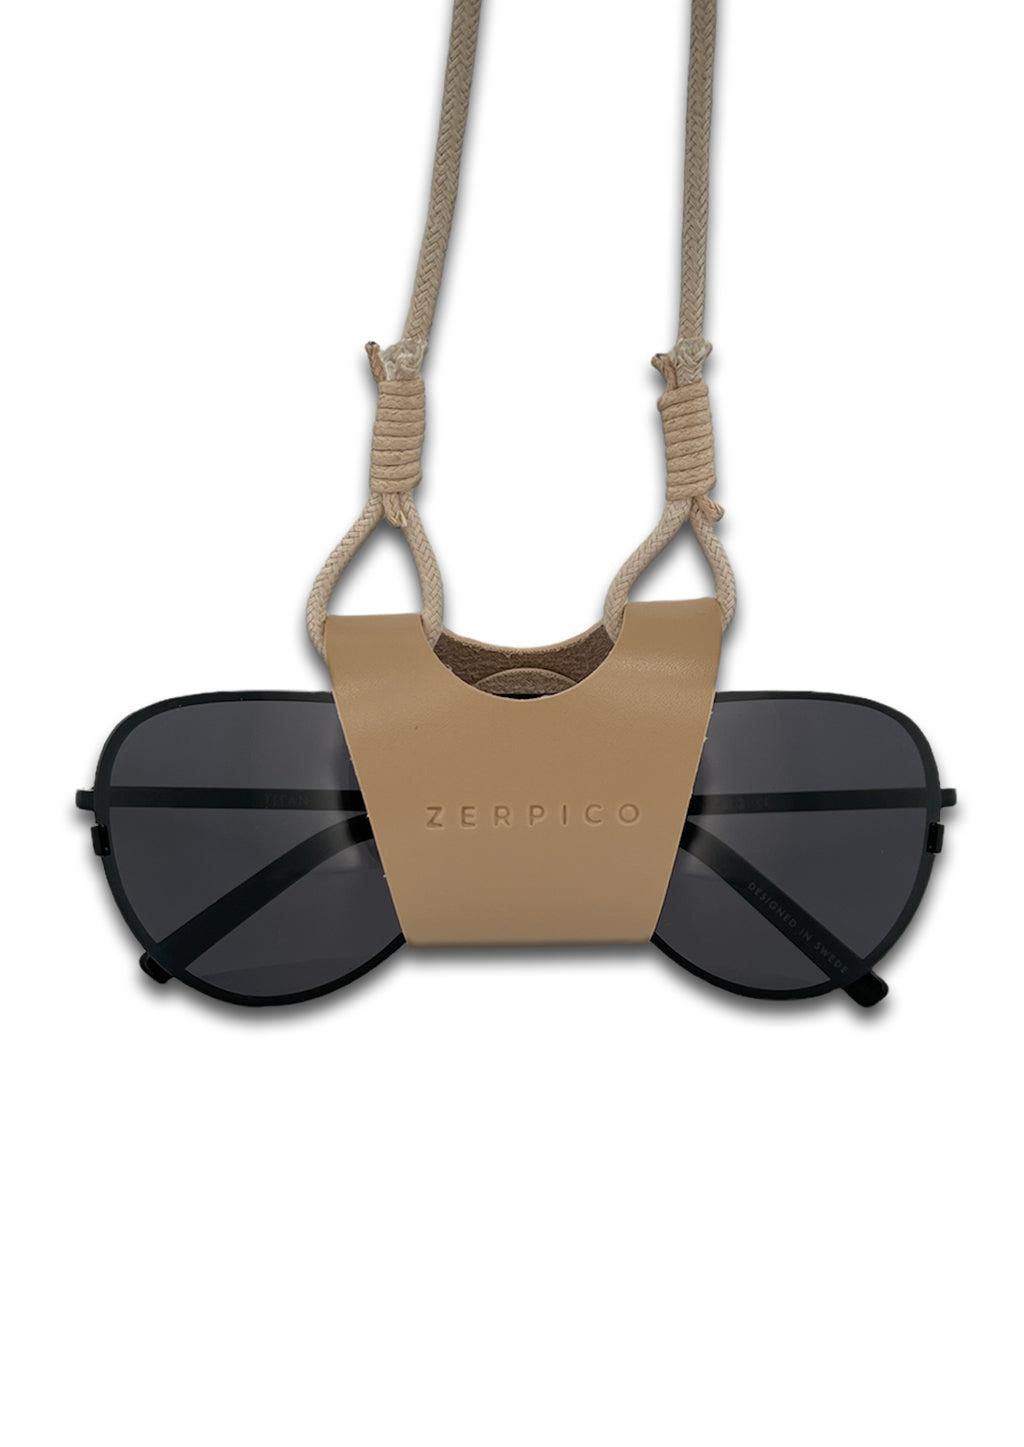 Sunglasses carrier that will keep your sunglasses around your neck. In beige leather.